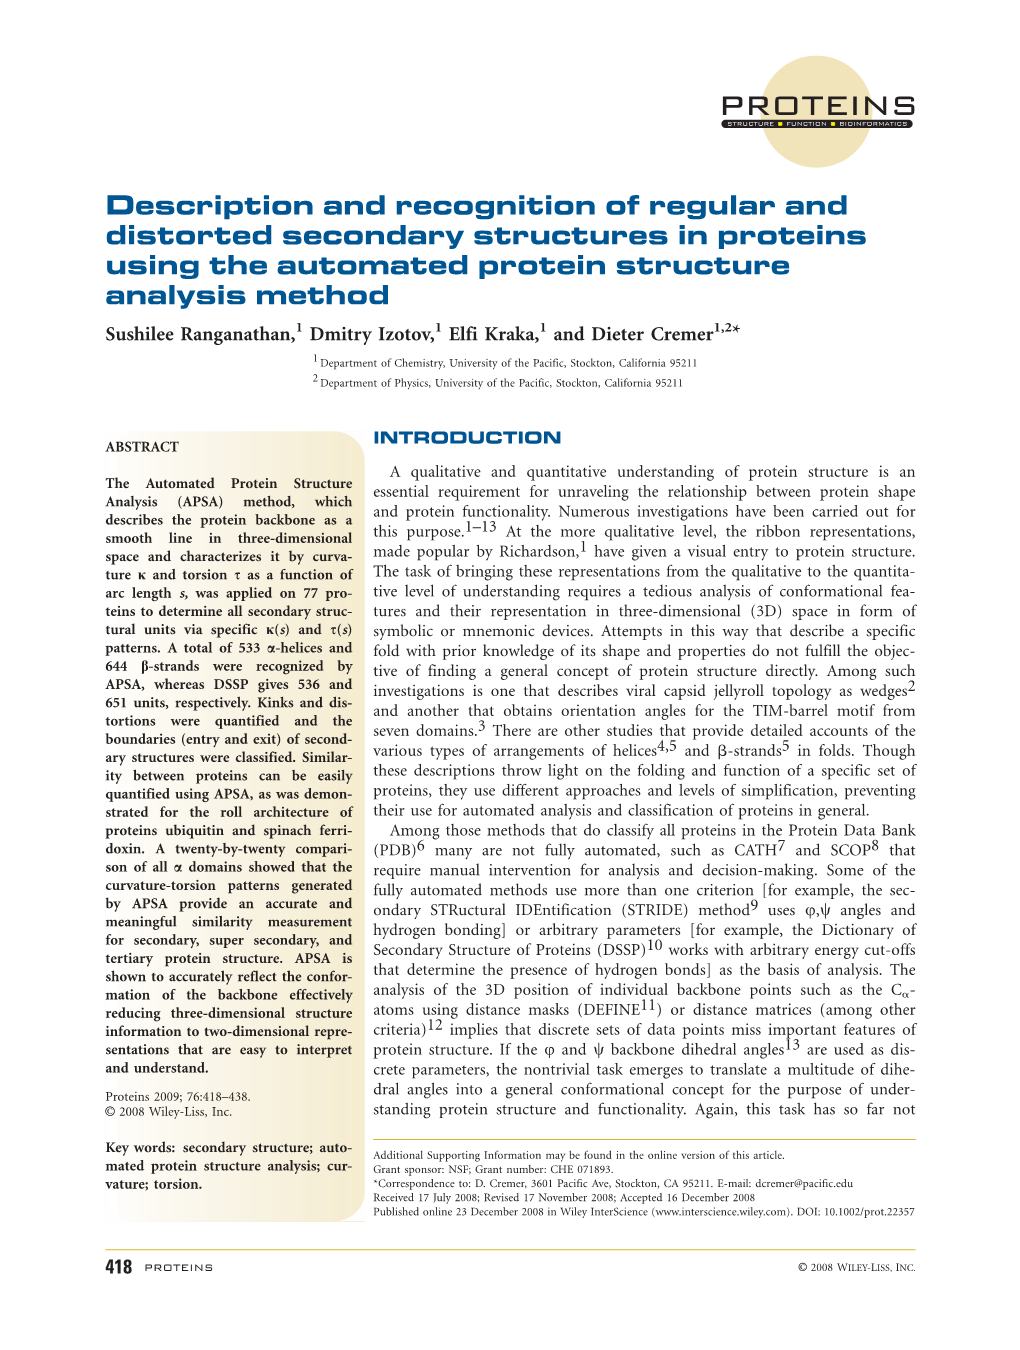 Description and Recognition of Regular and Distorted Secondary Structures